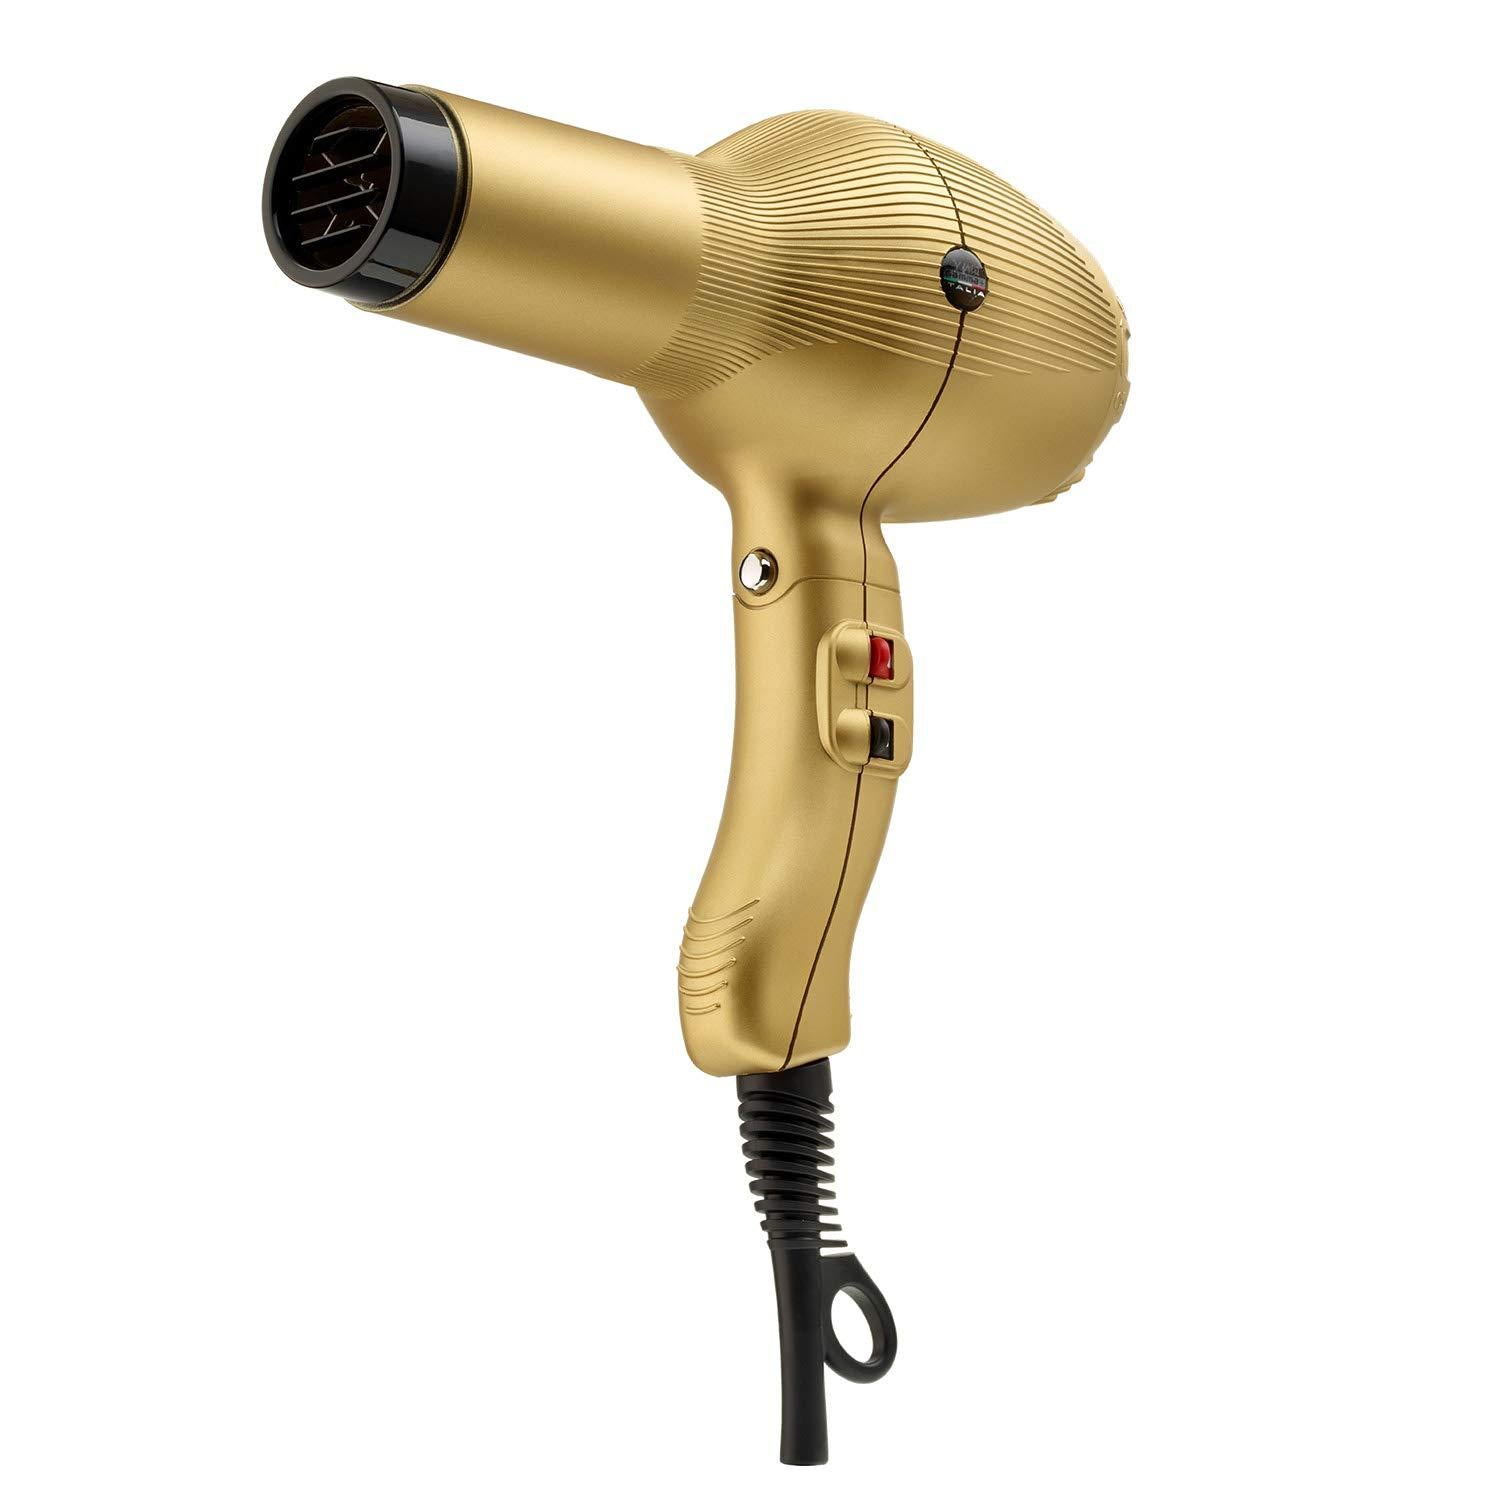 GAMMA+ Absolute Power Hair Dryer,  Gold  or Silver  Color : AP-S